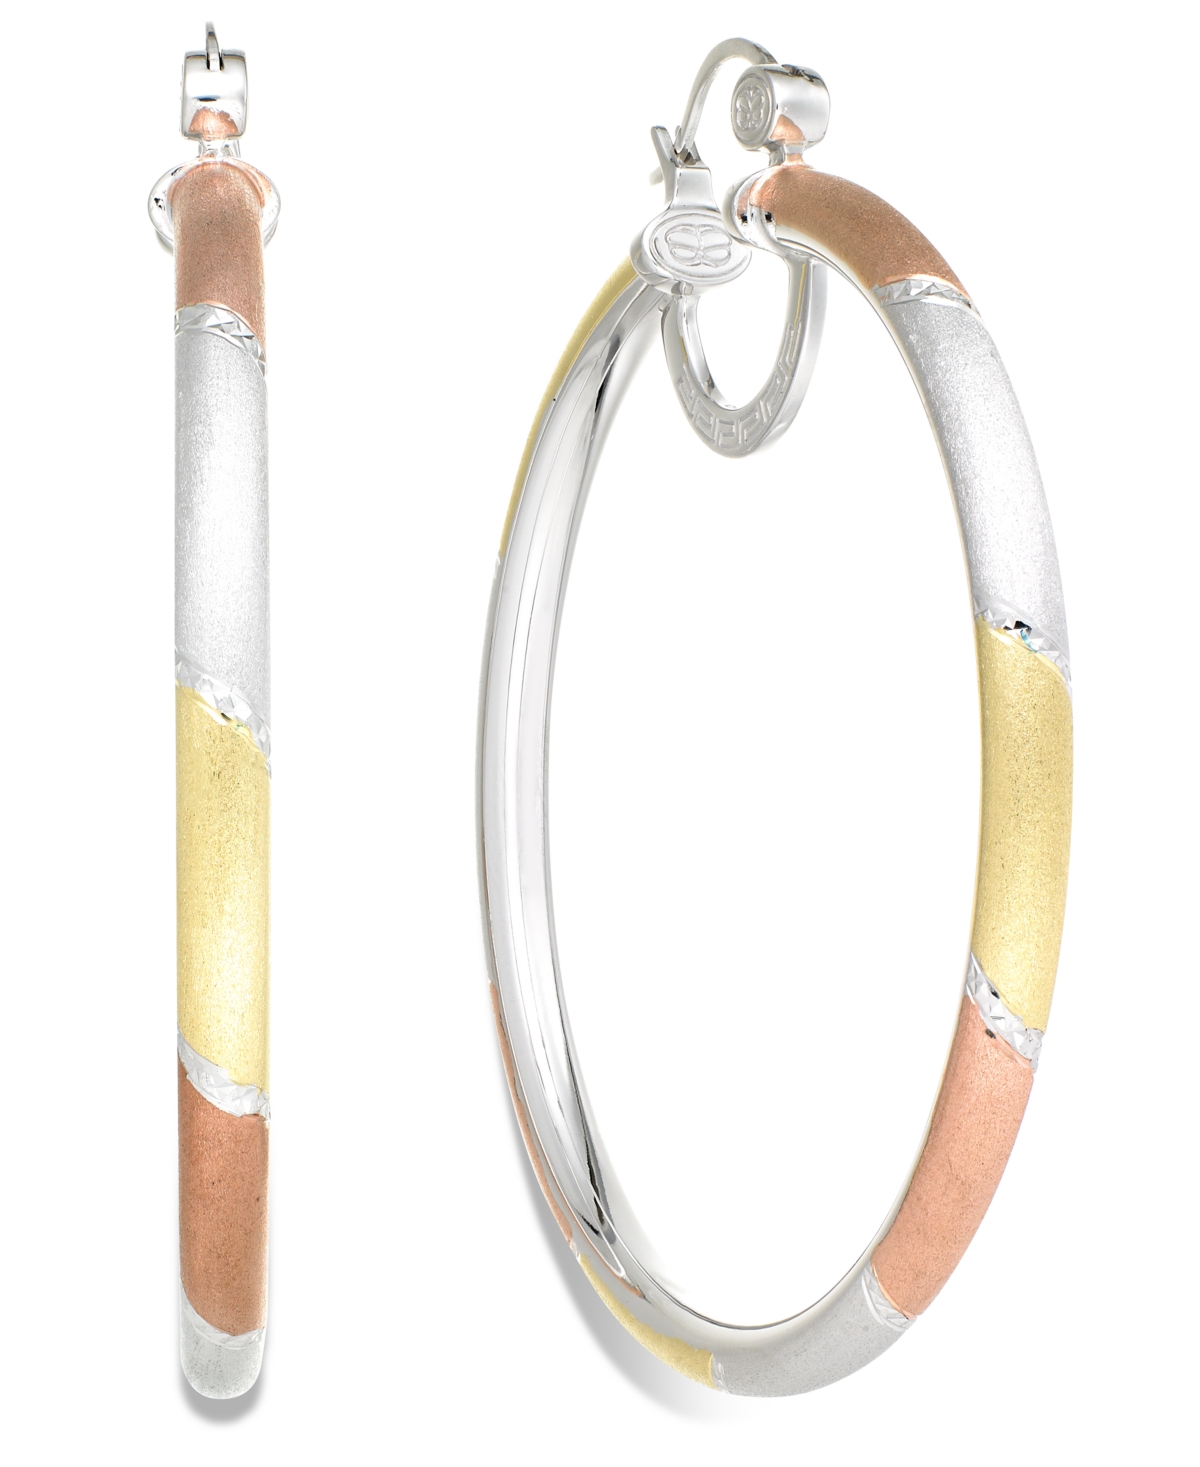 Platinum, 18k Rose Gold and 18k Gold over Sterling Silver Earrings, Extra-Large Tri-Color Hoop Earrings